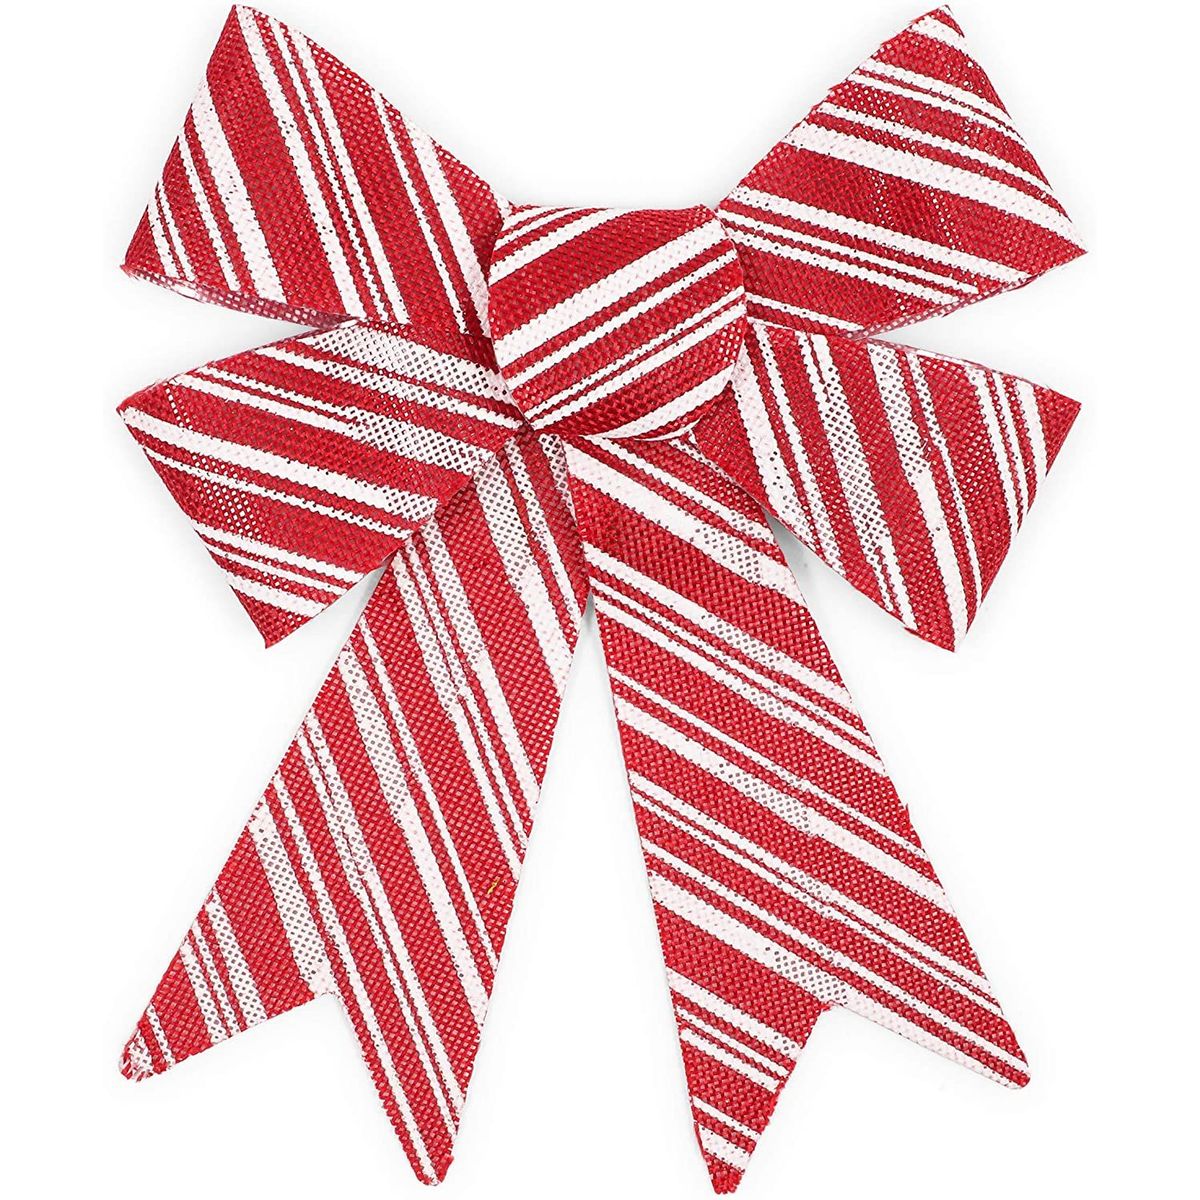 WILLBOND Christmas Red White Bow Red White Stripe Christmas Bow Candy Cane  Pattern Burlap Bow Large Wreath Bow Decorative Ribbon Bows Bow for Tree